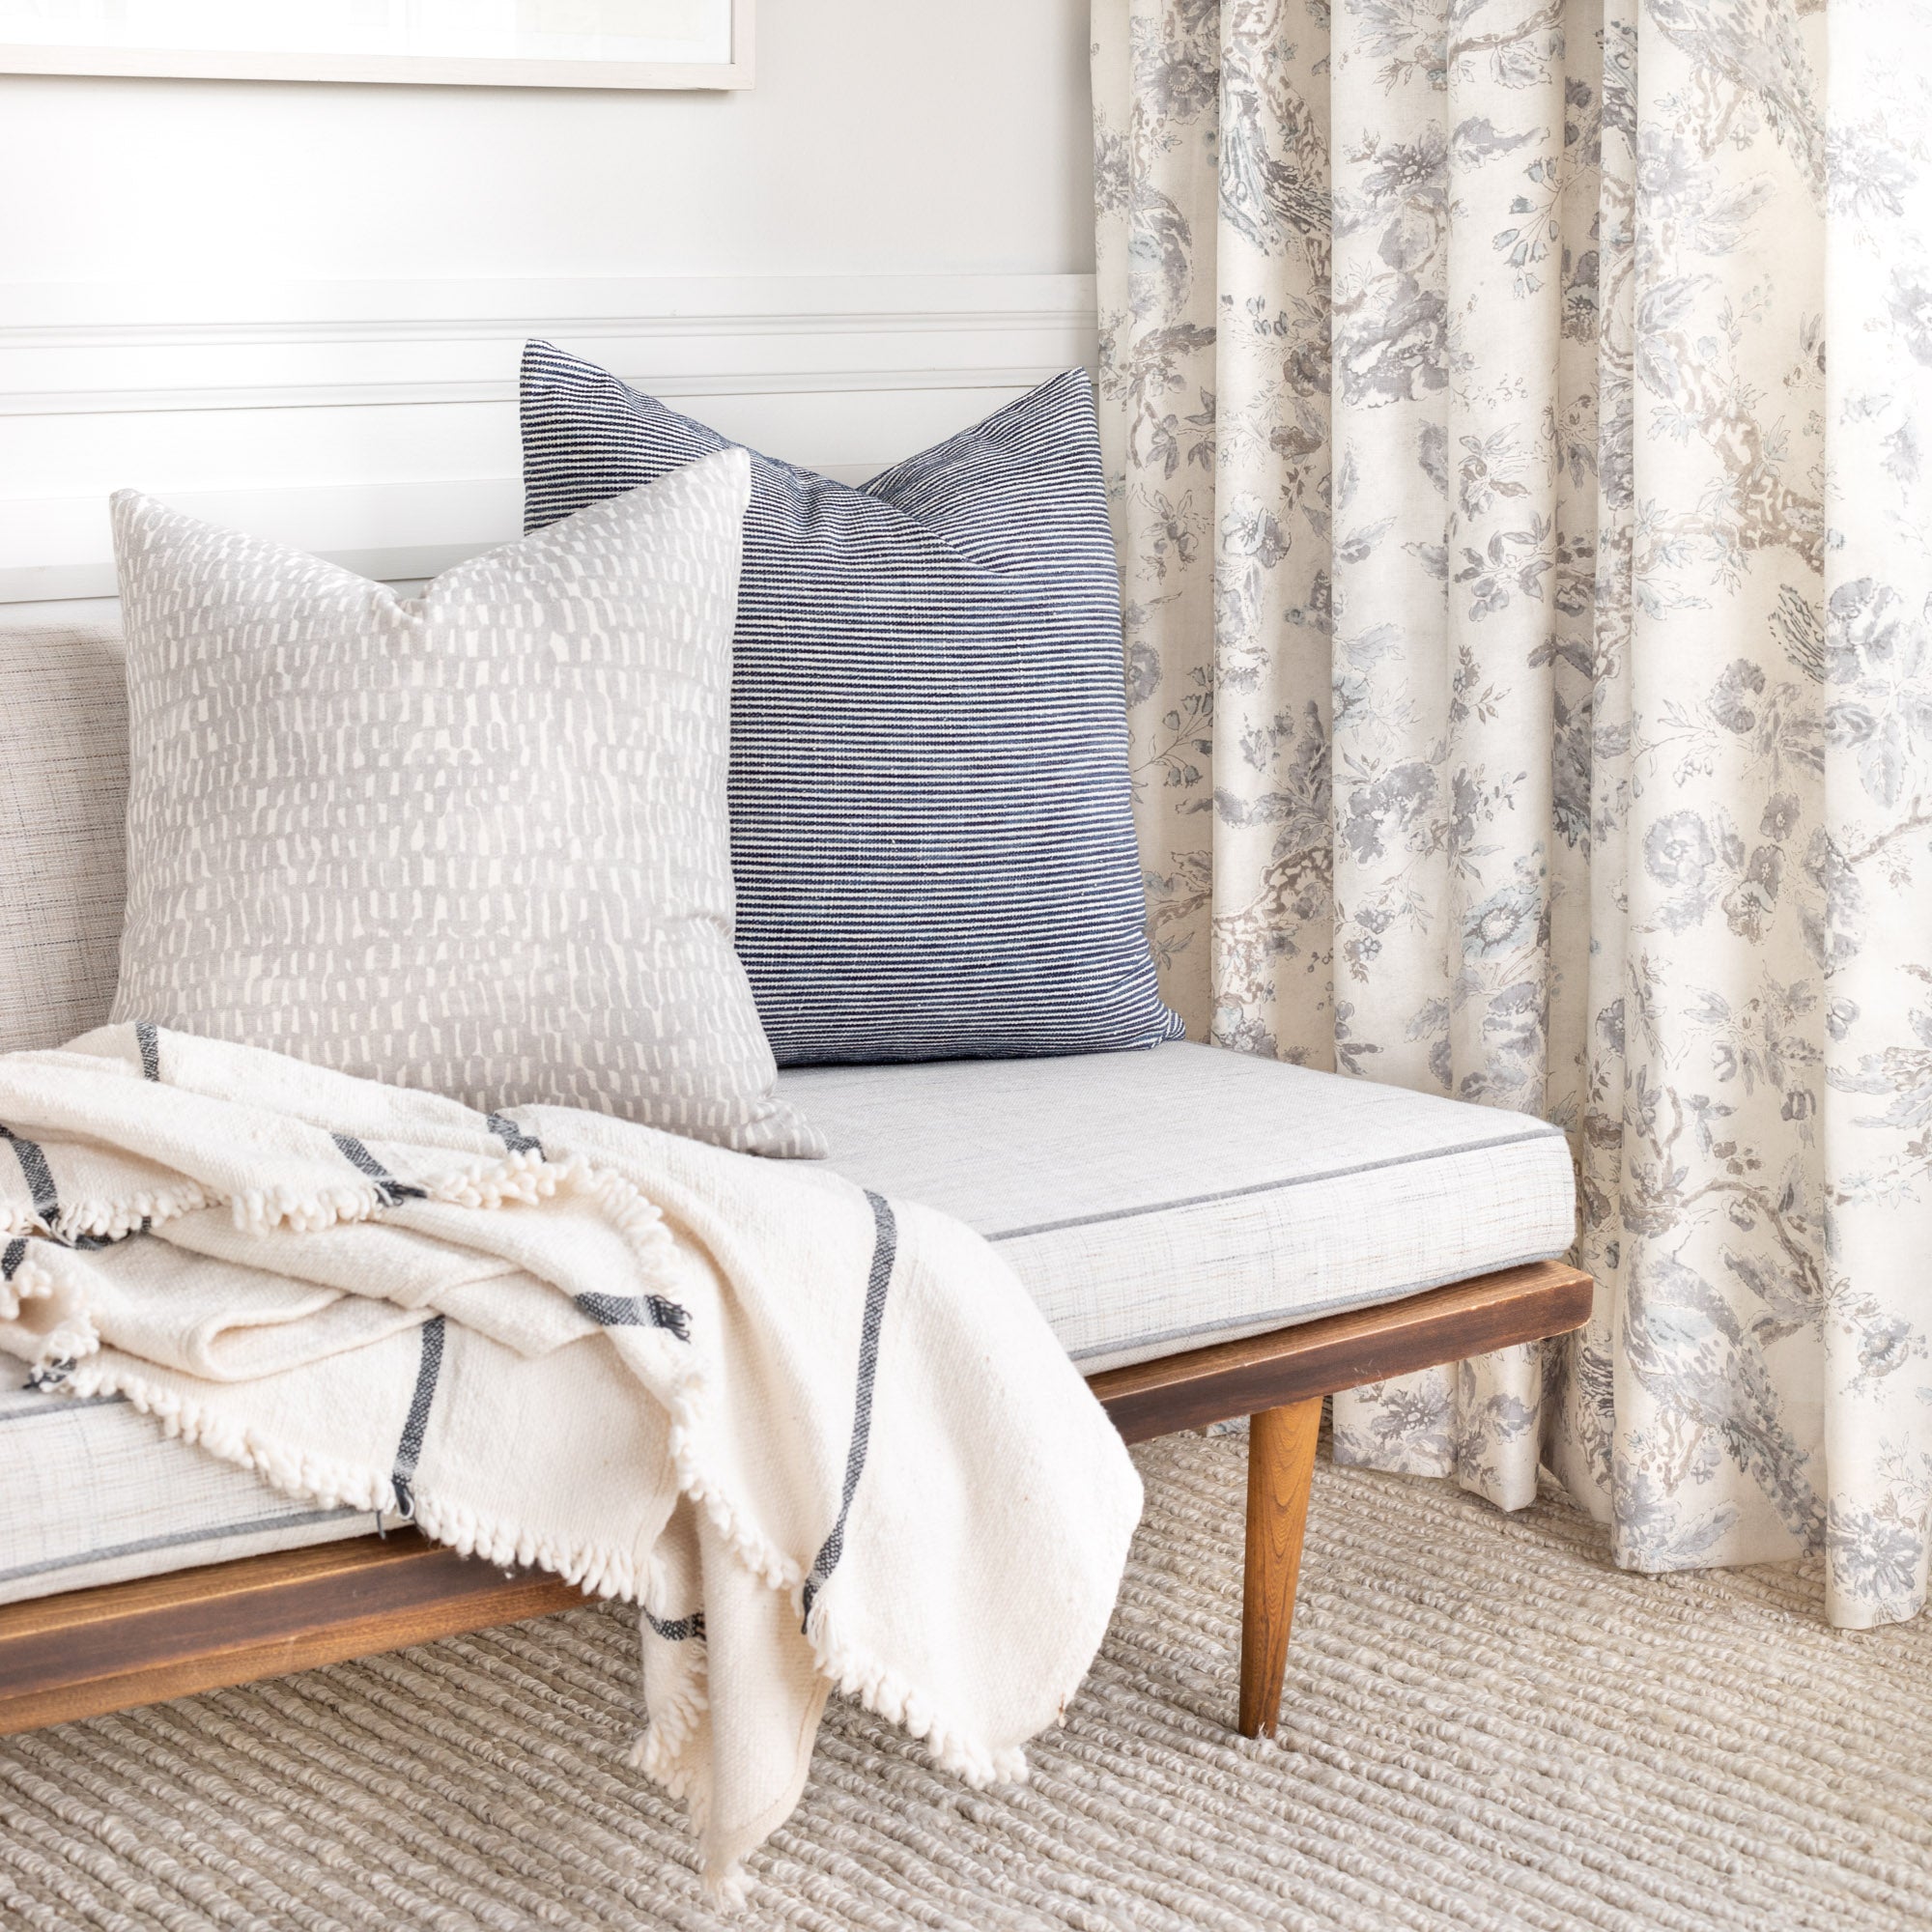 Grey and blue living room vignette: Marklin pillow and Avareno pillow on sofa with Collette Flint drapes